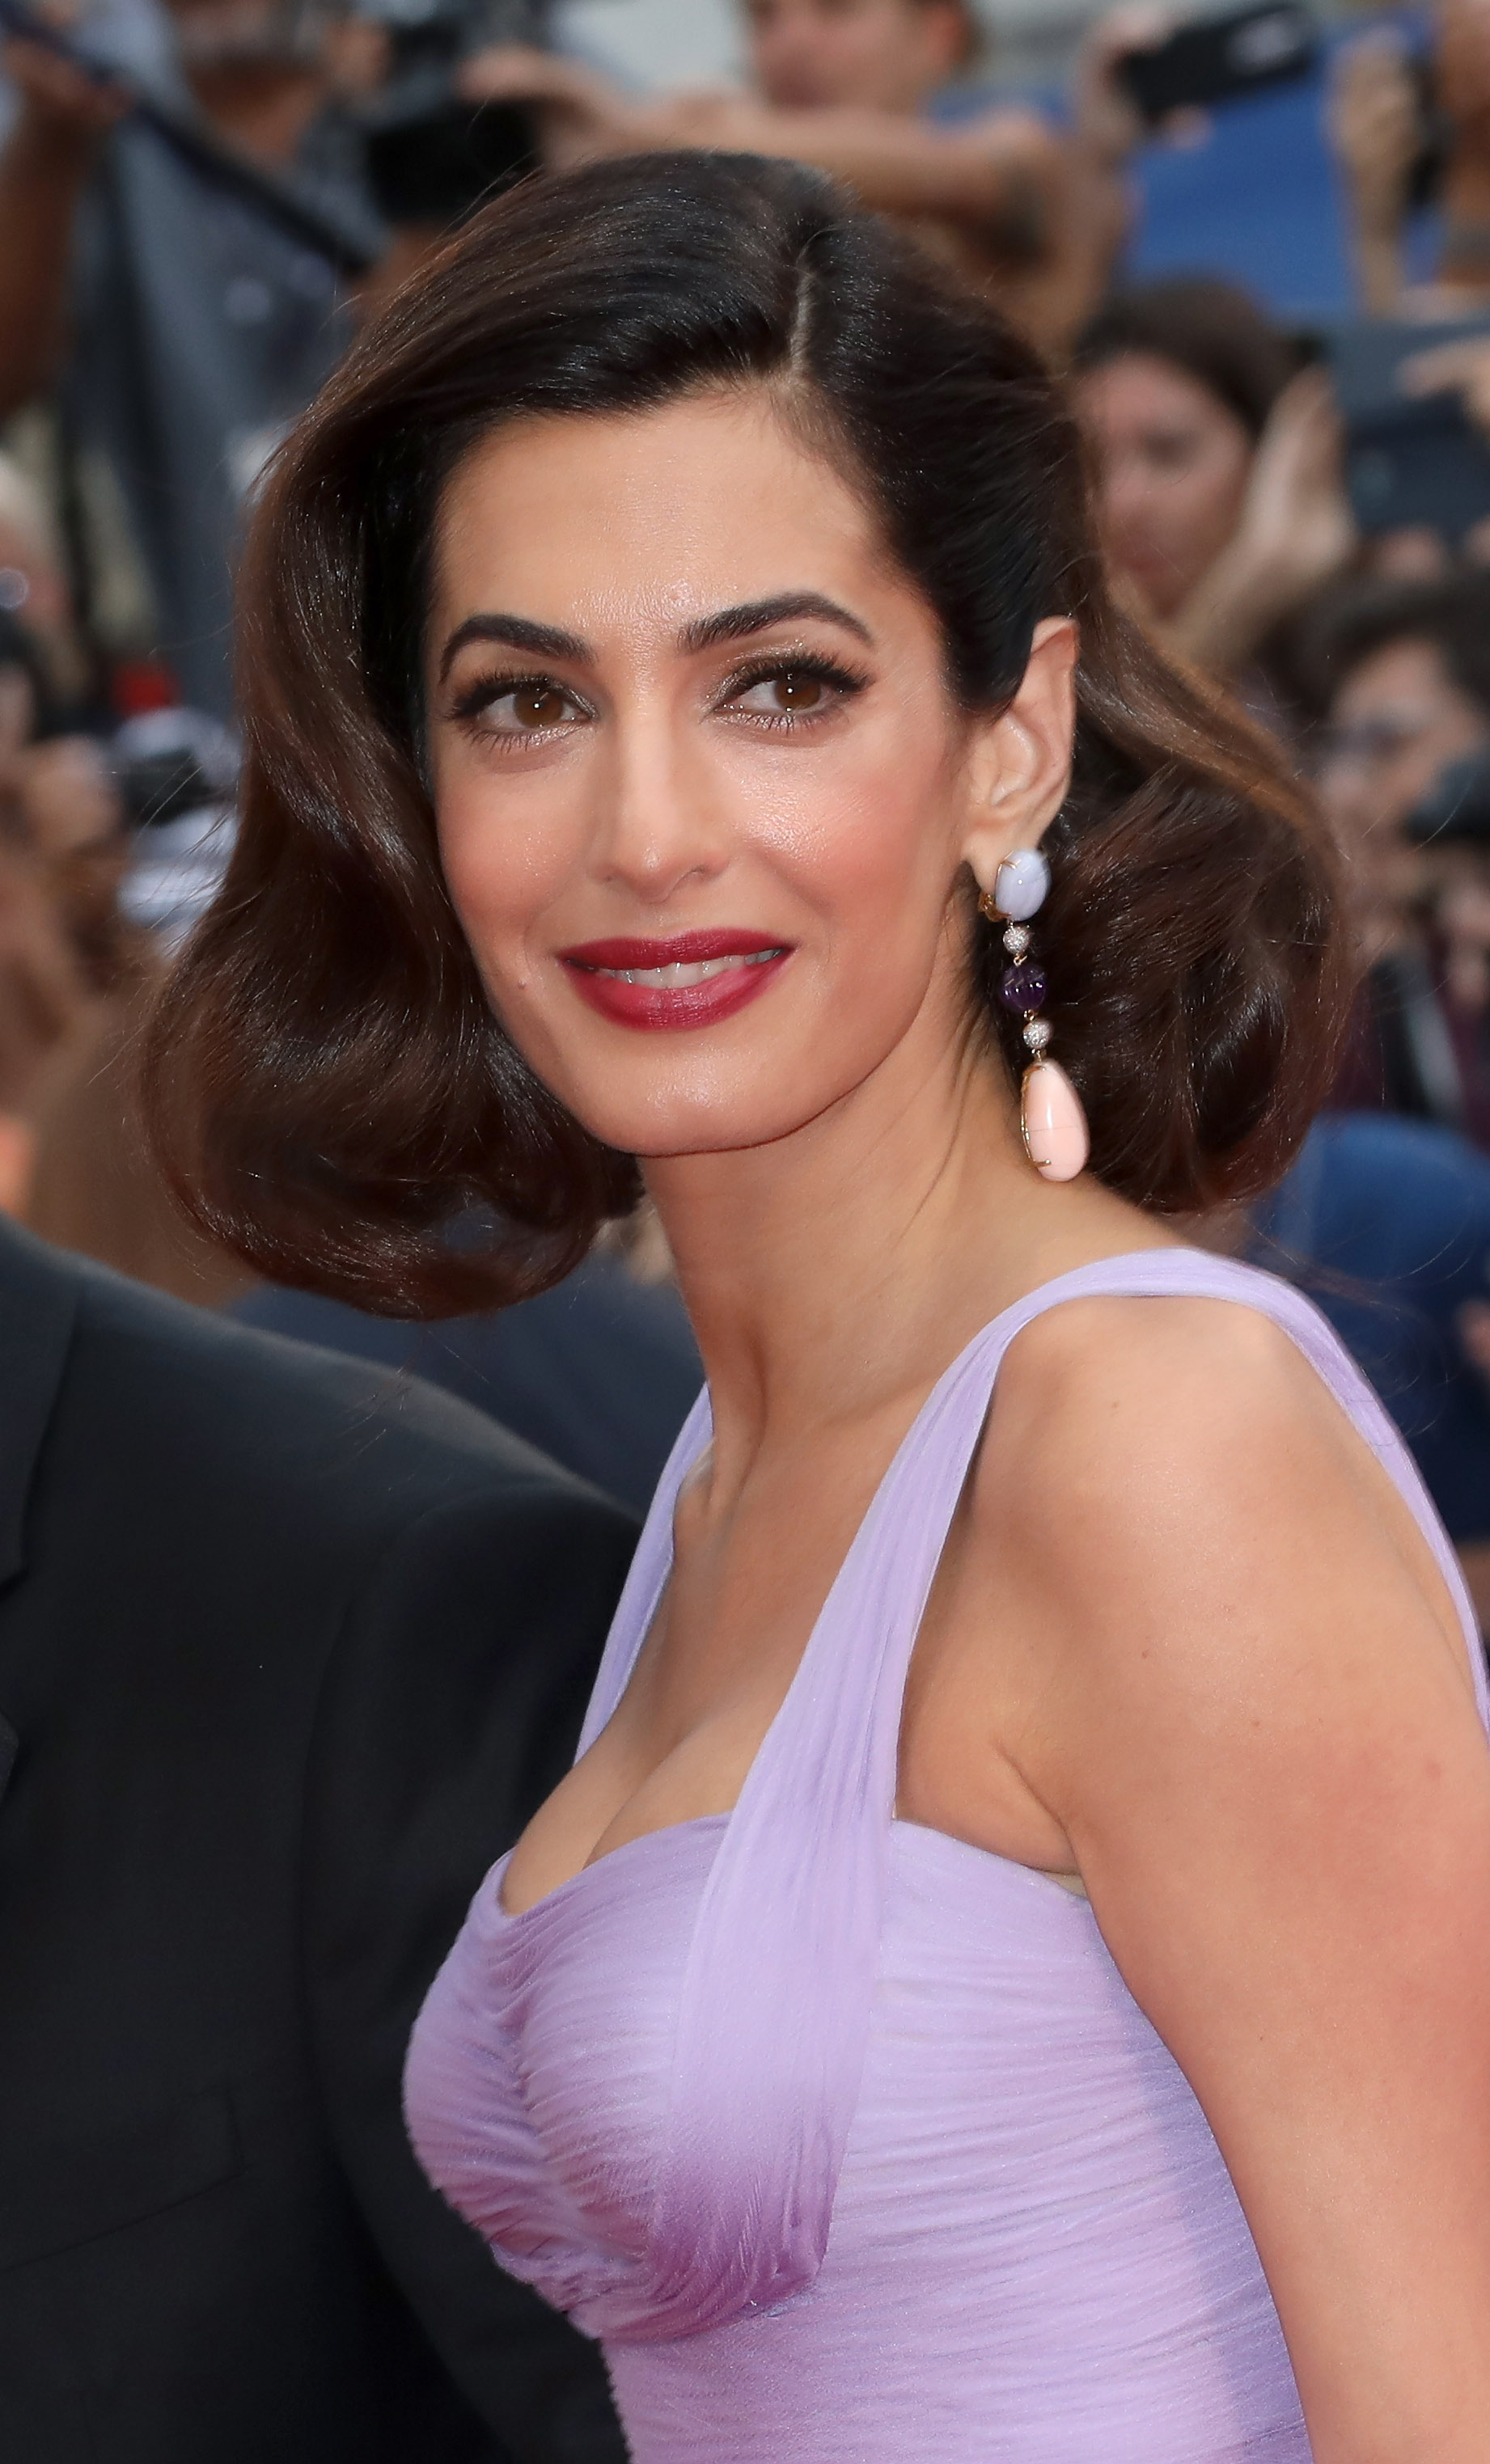 Amal Clooney at the 74th Venice Film Festival in Venice, Italy on September 2, 2017 | Source: Getty Images